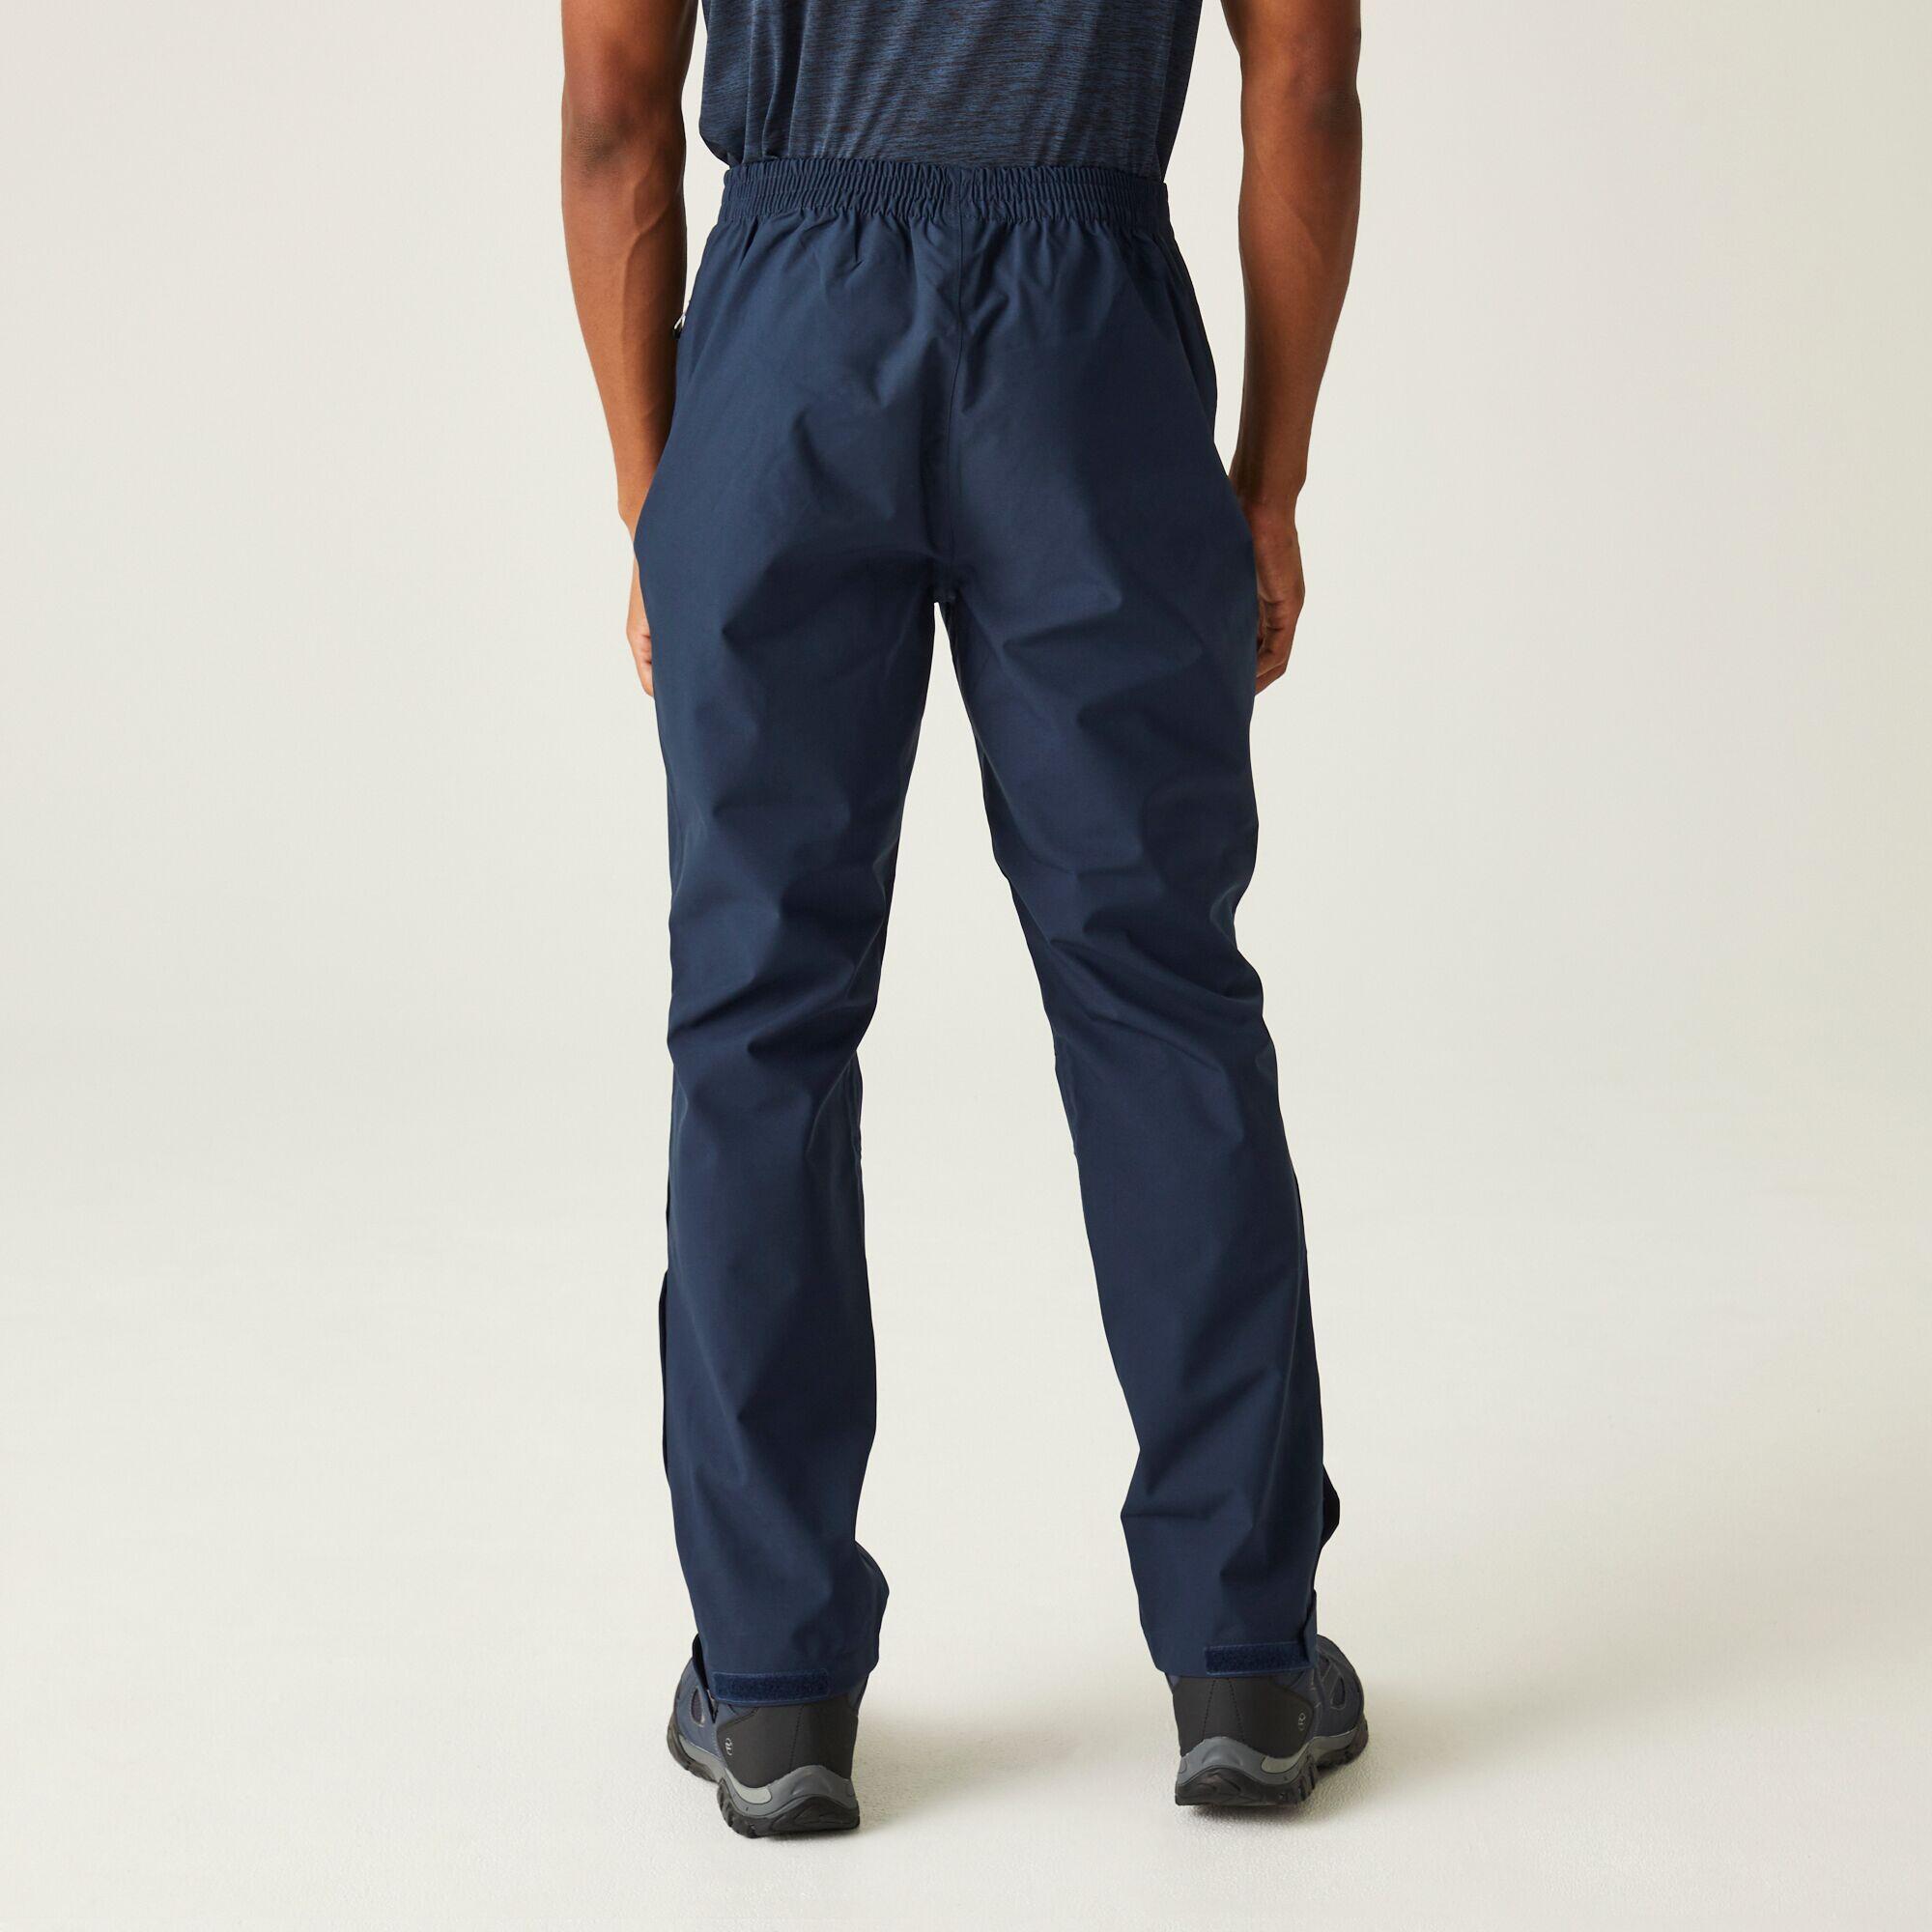 Highton Stretch Men's Hiking Overtrousers - Navy 2/6